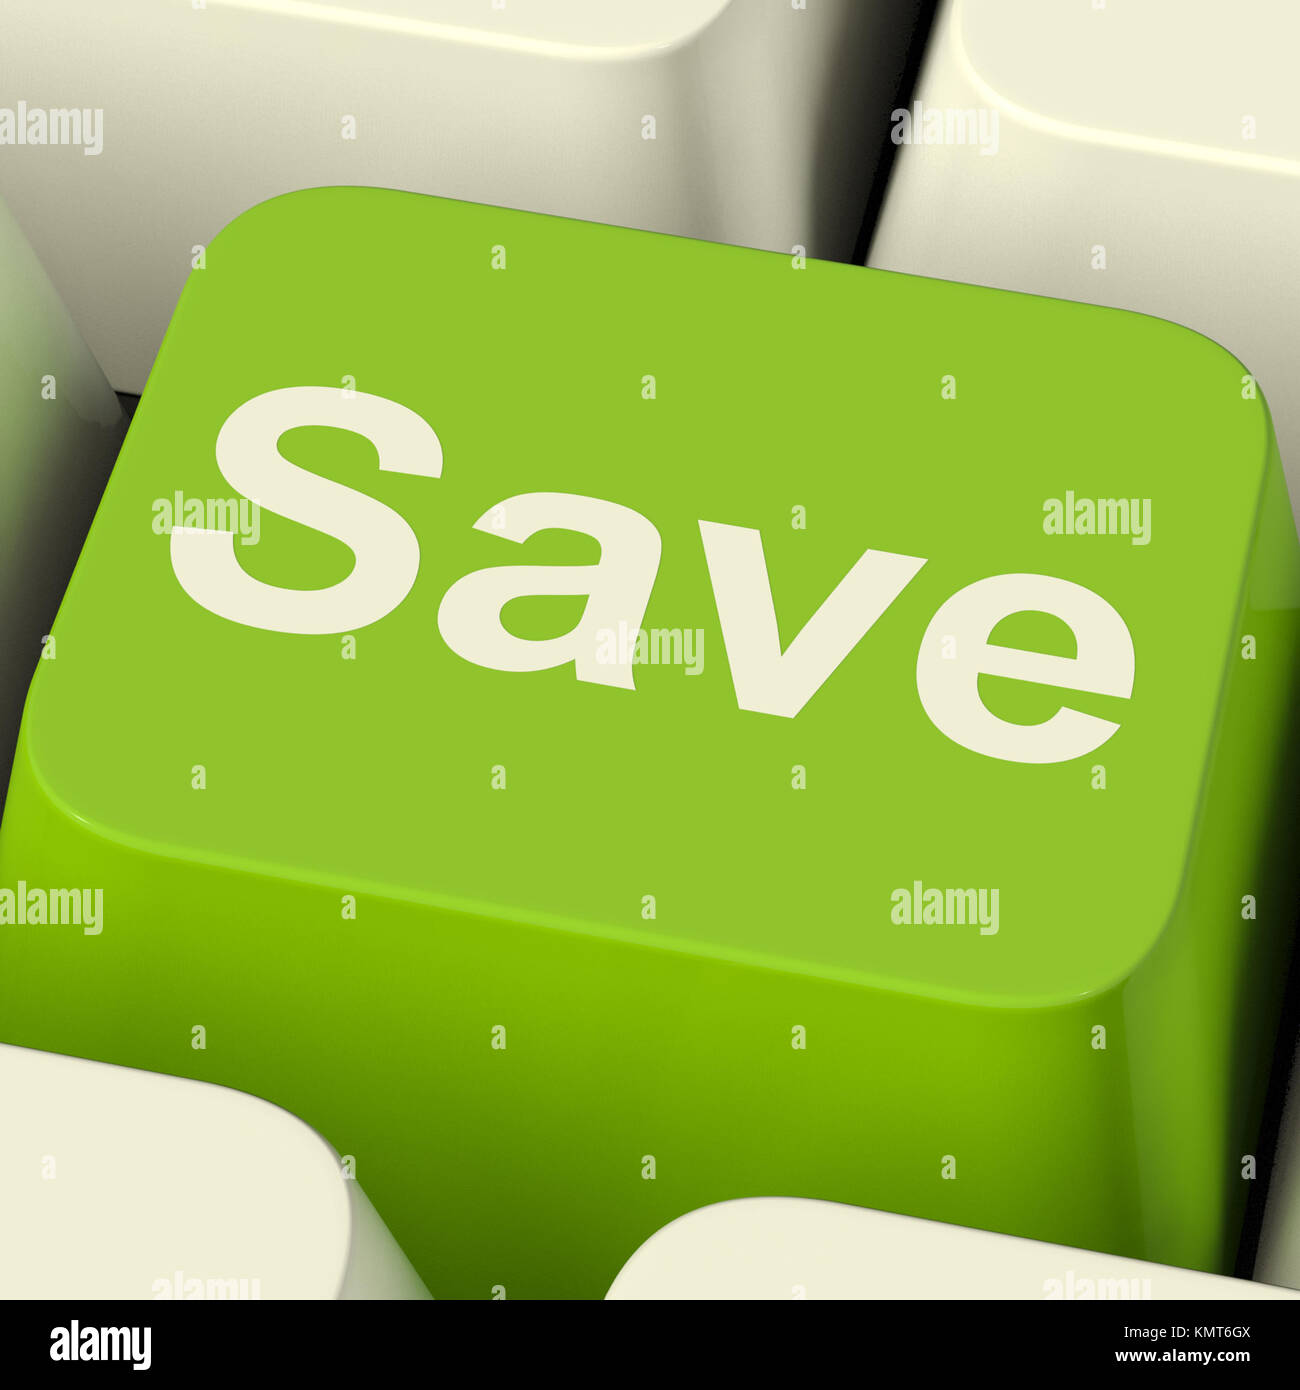 Save Computer Key As Symbol For Discount Or Promotion Stock Photo